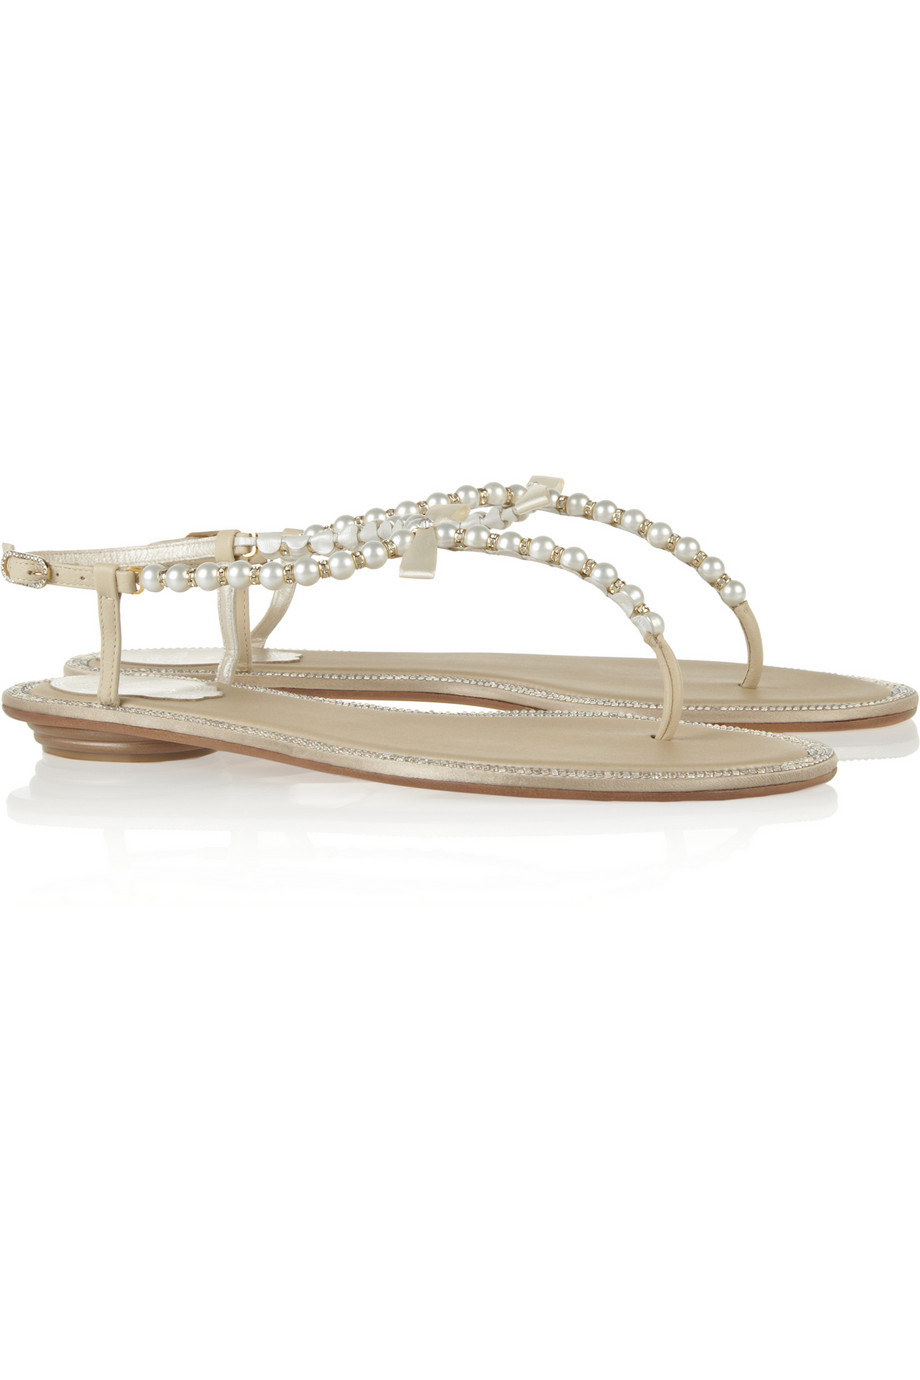 Lyst - Rene Caovilla Embellished Leather Sandals in White